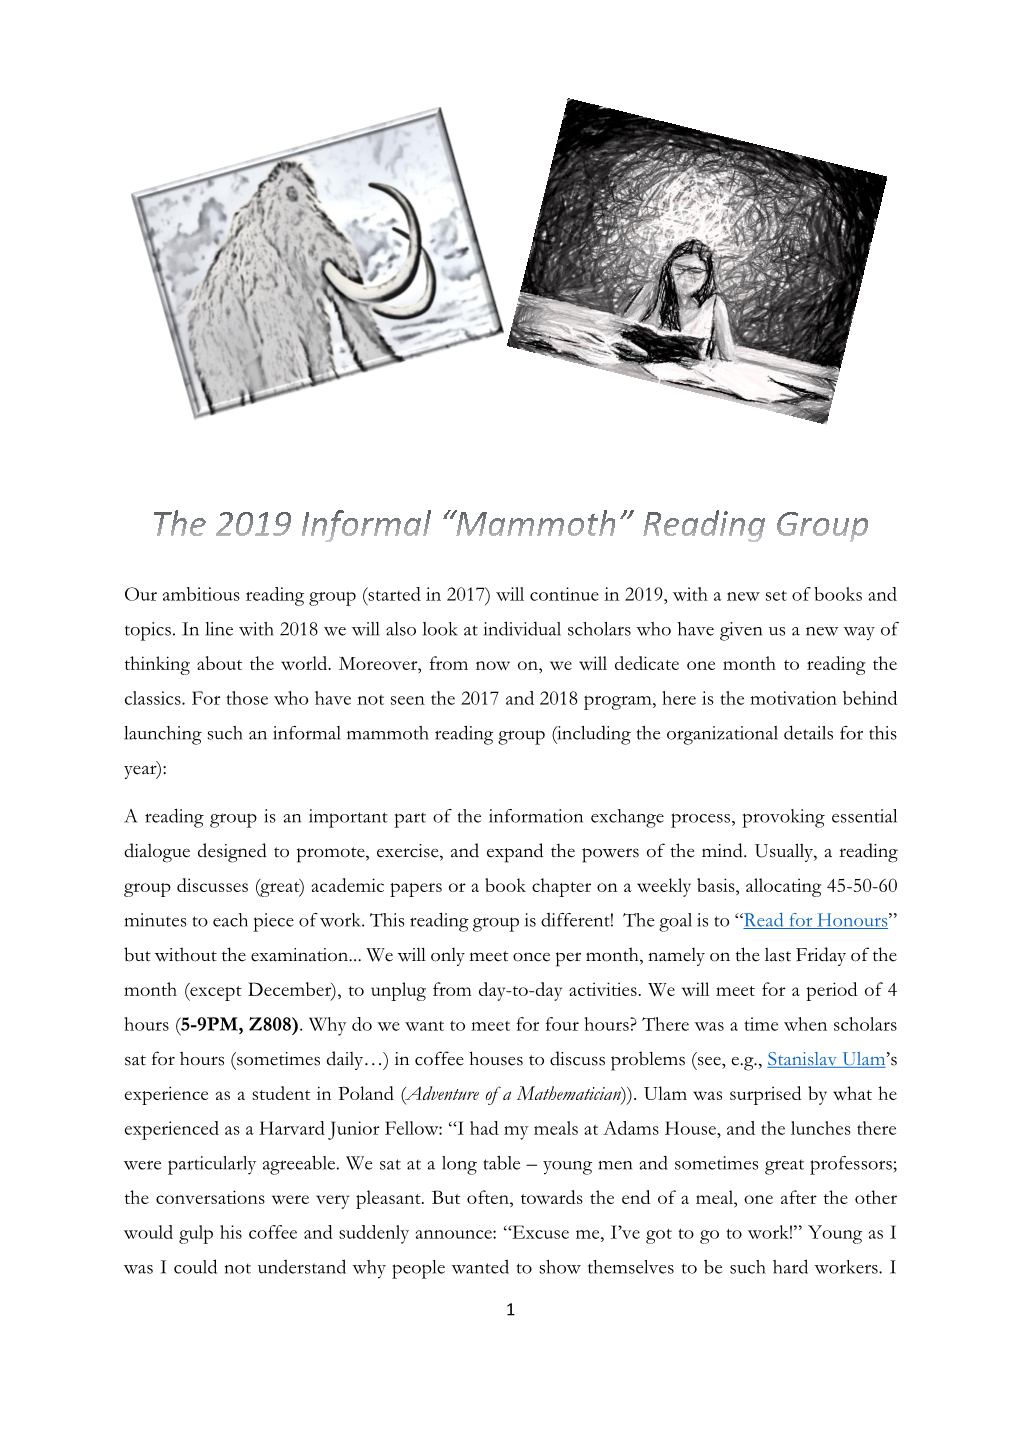 Reading Group 2019